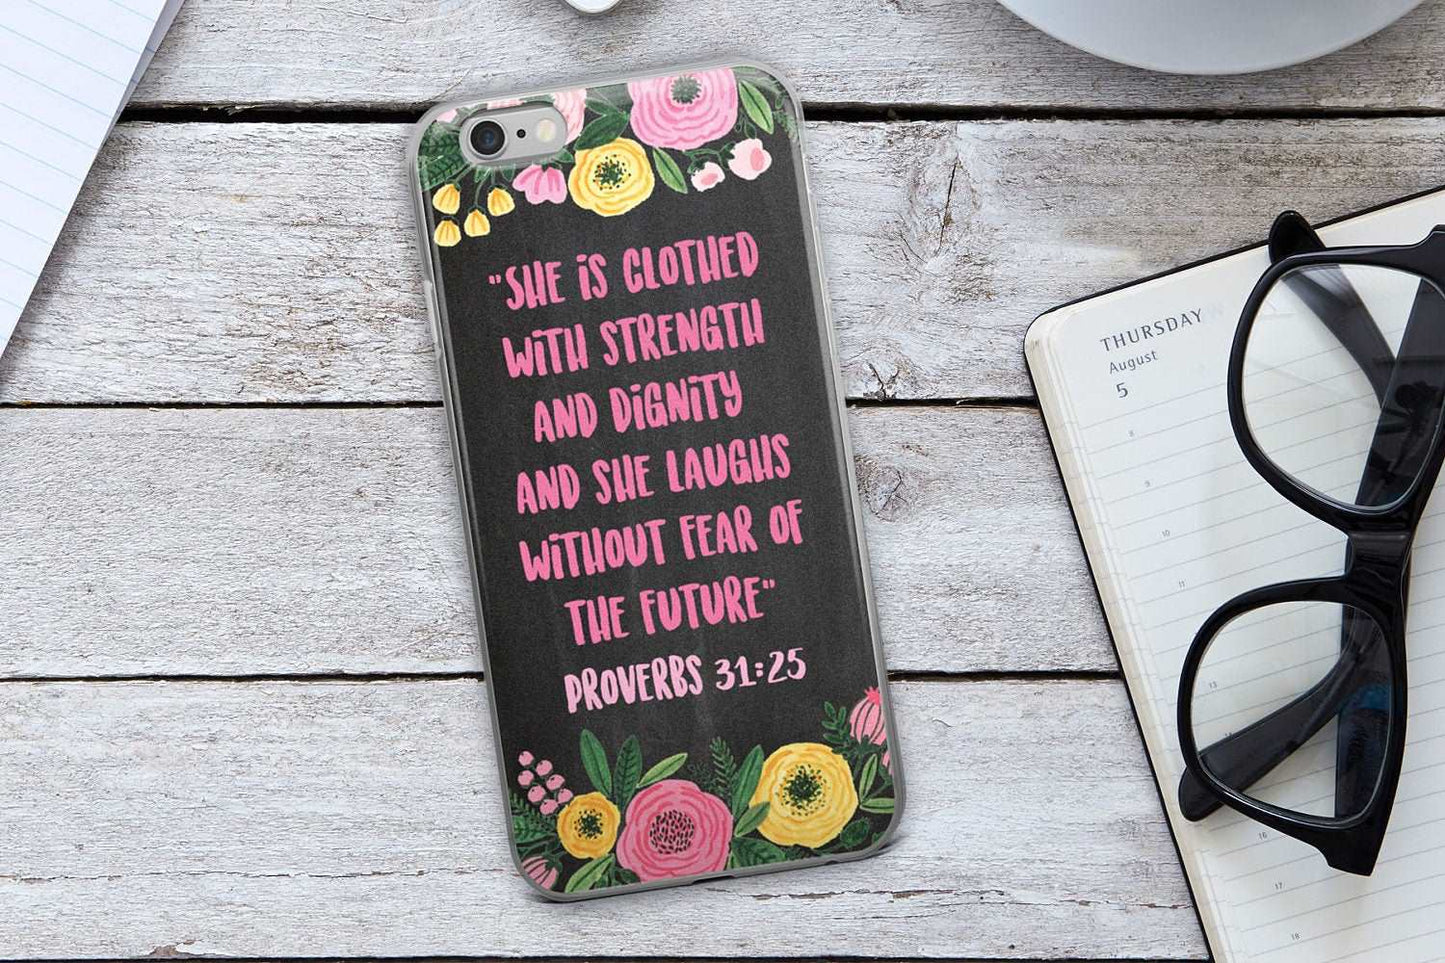 Bible Verse Phone Case - She Is Clothed With Strength And Dignity Proverbs 31